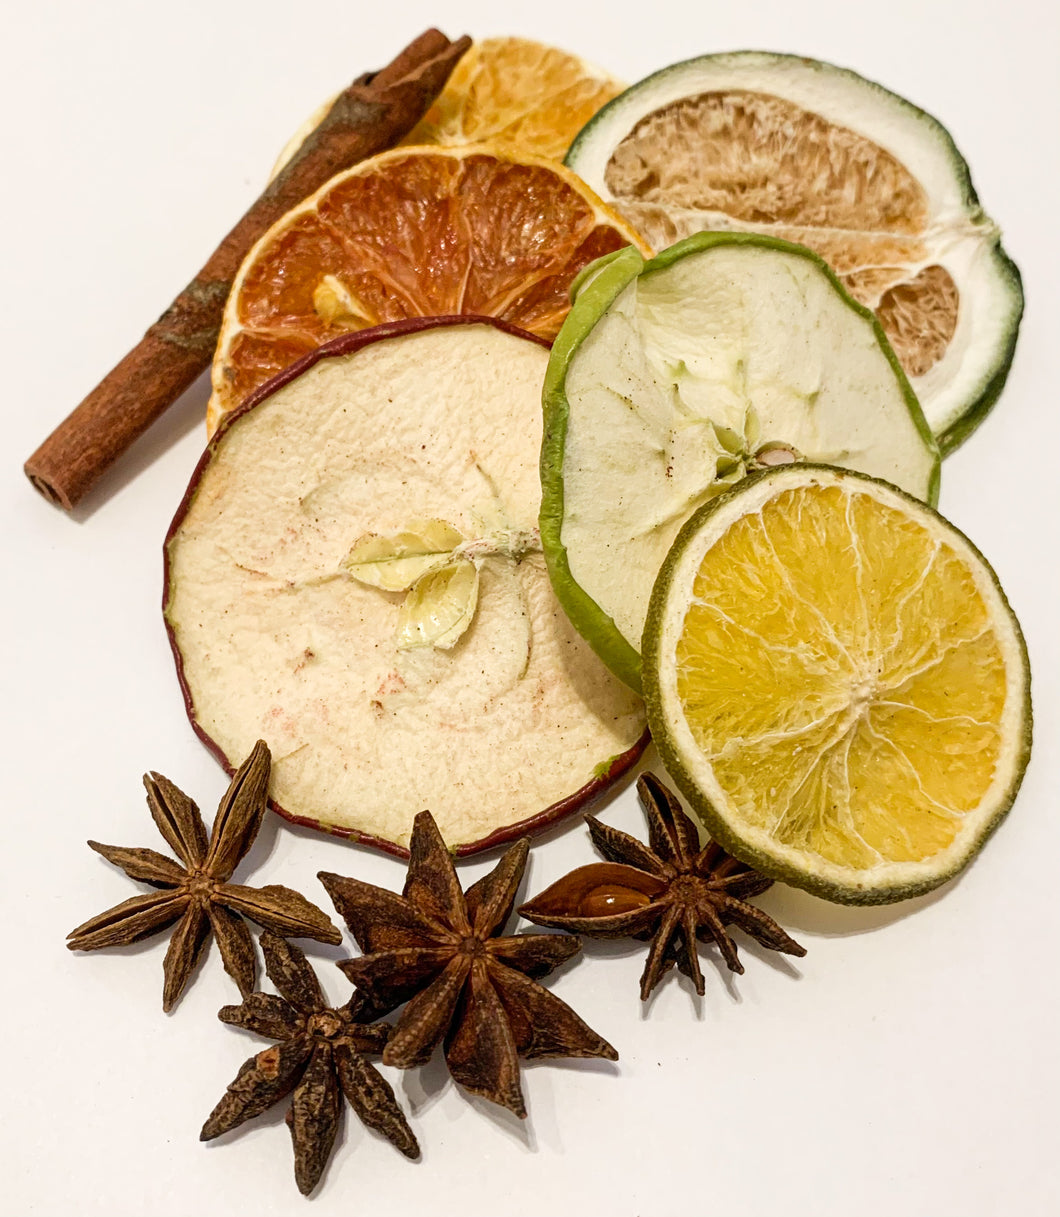 Dried Fruit Slices & Spices